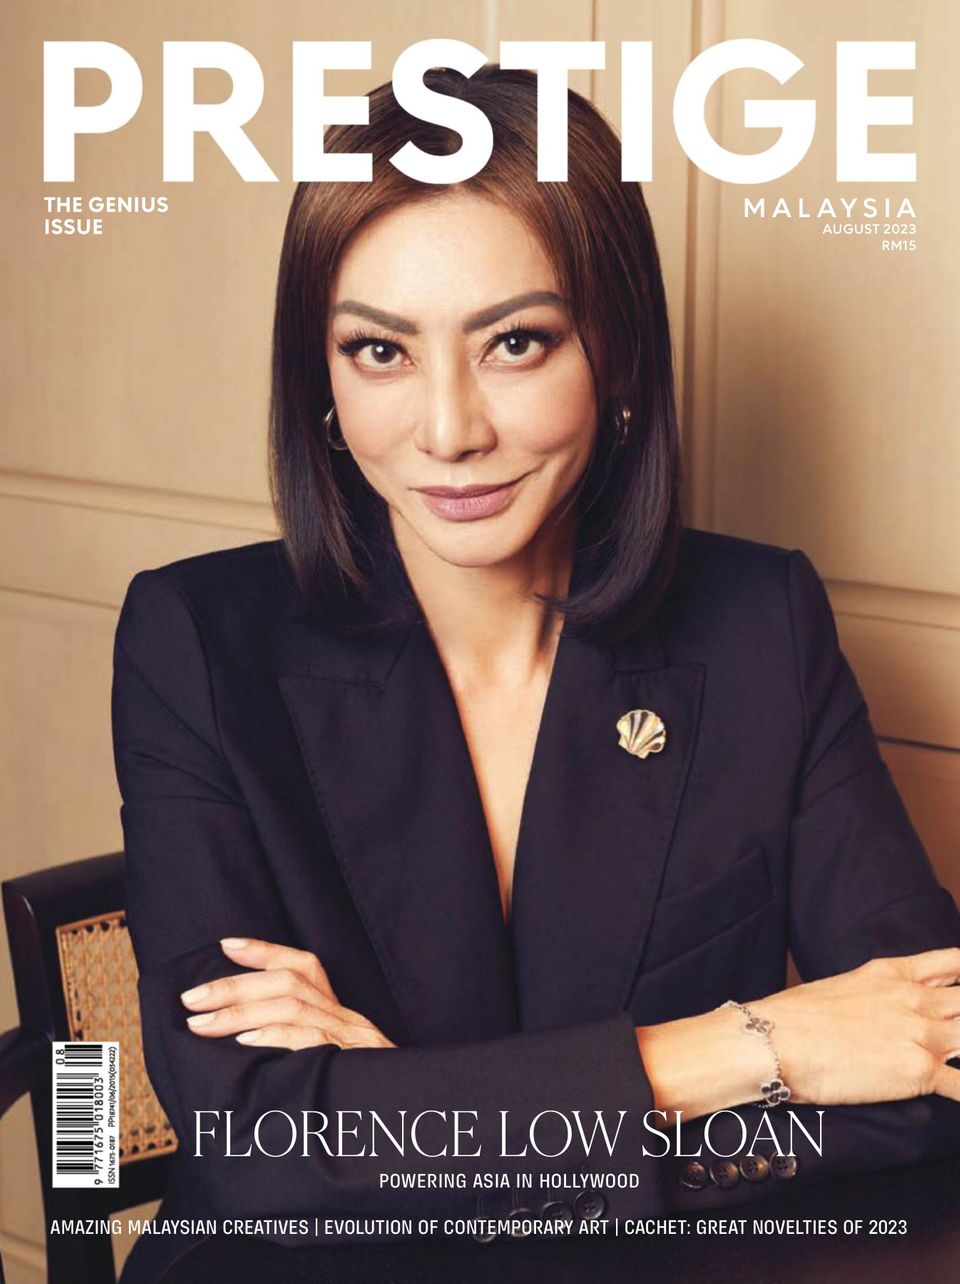 https://www.discountmags.com/shopimages/products/extras/1088790-prestige-malaysia-cover-august-2023-issue.jpg